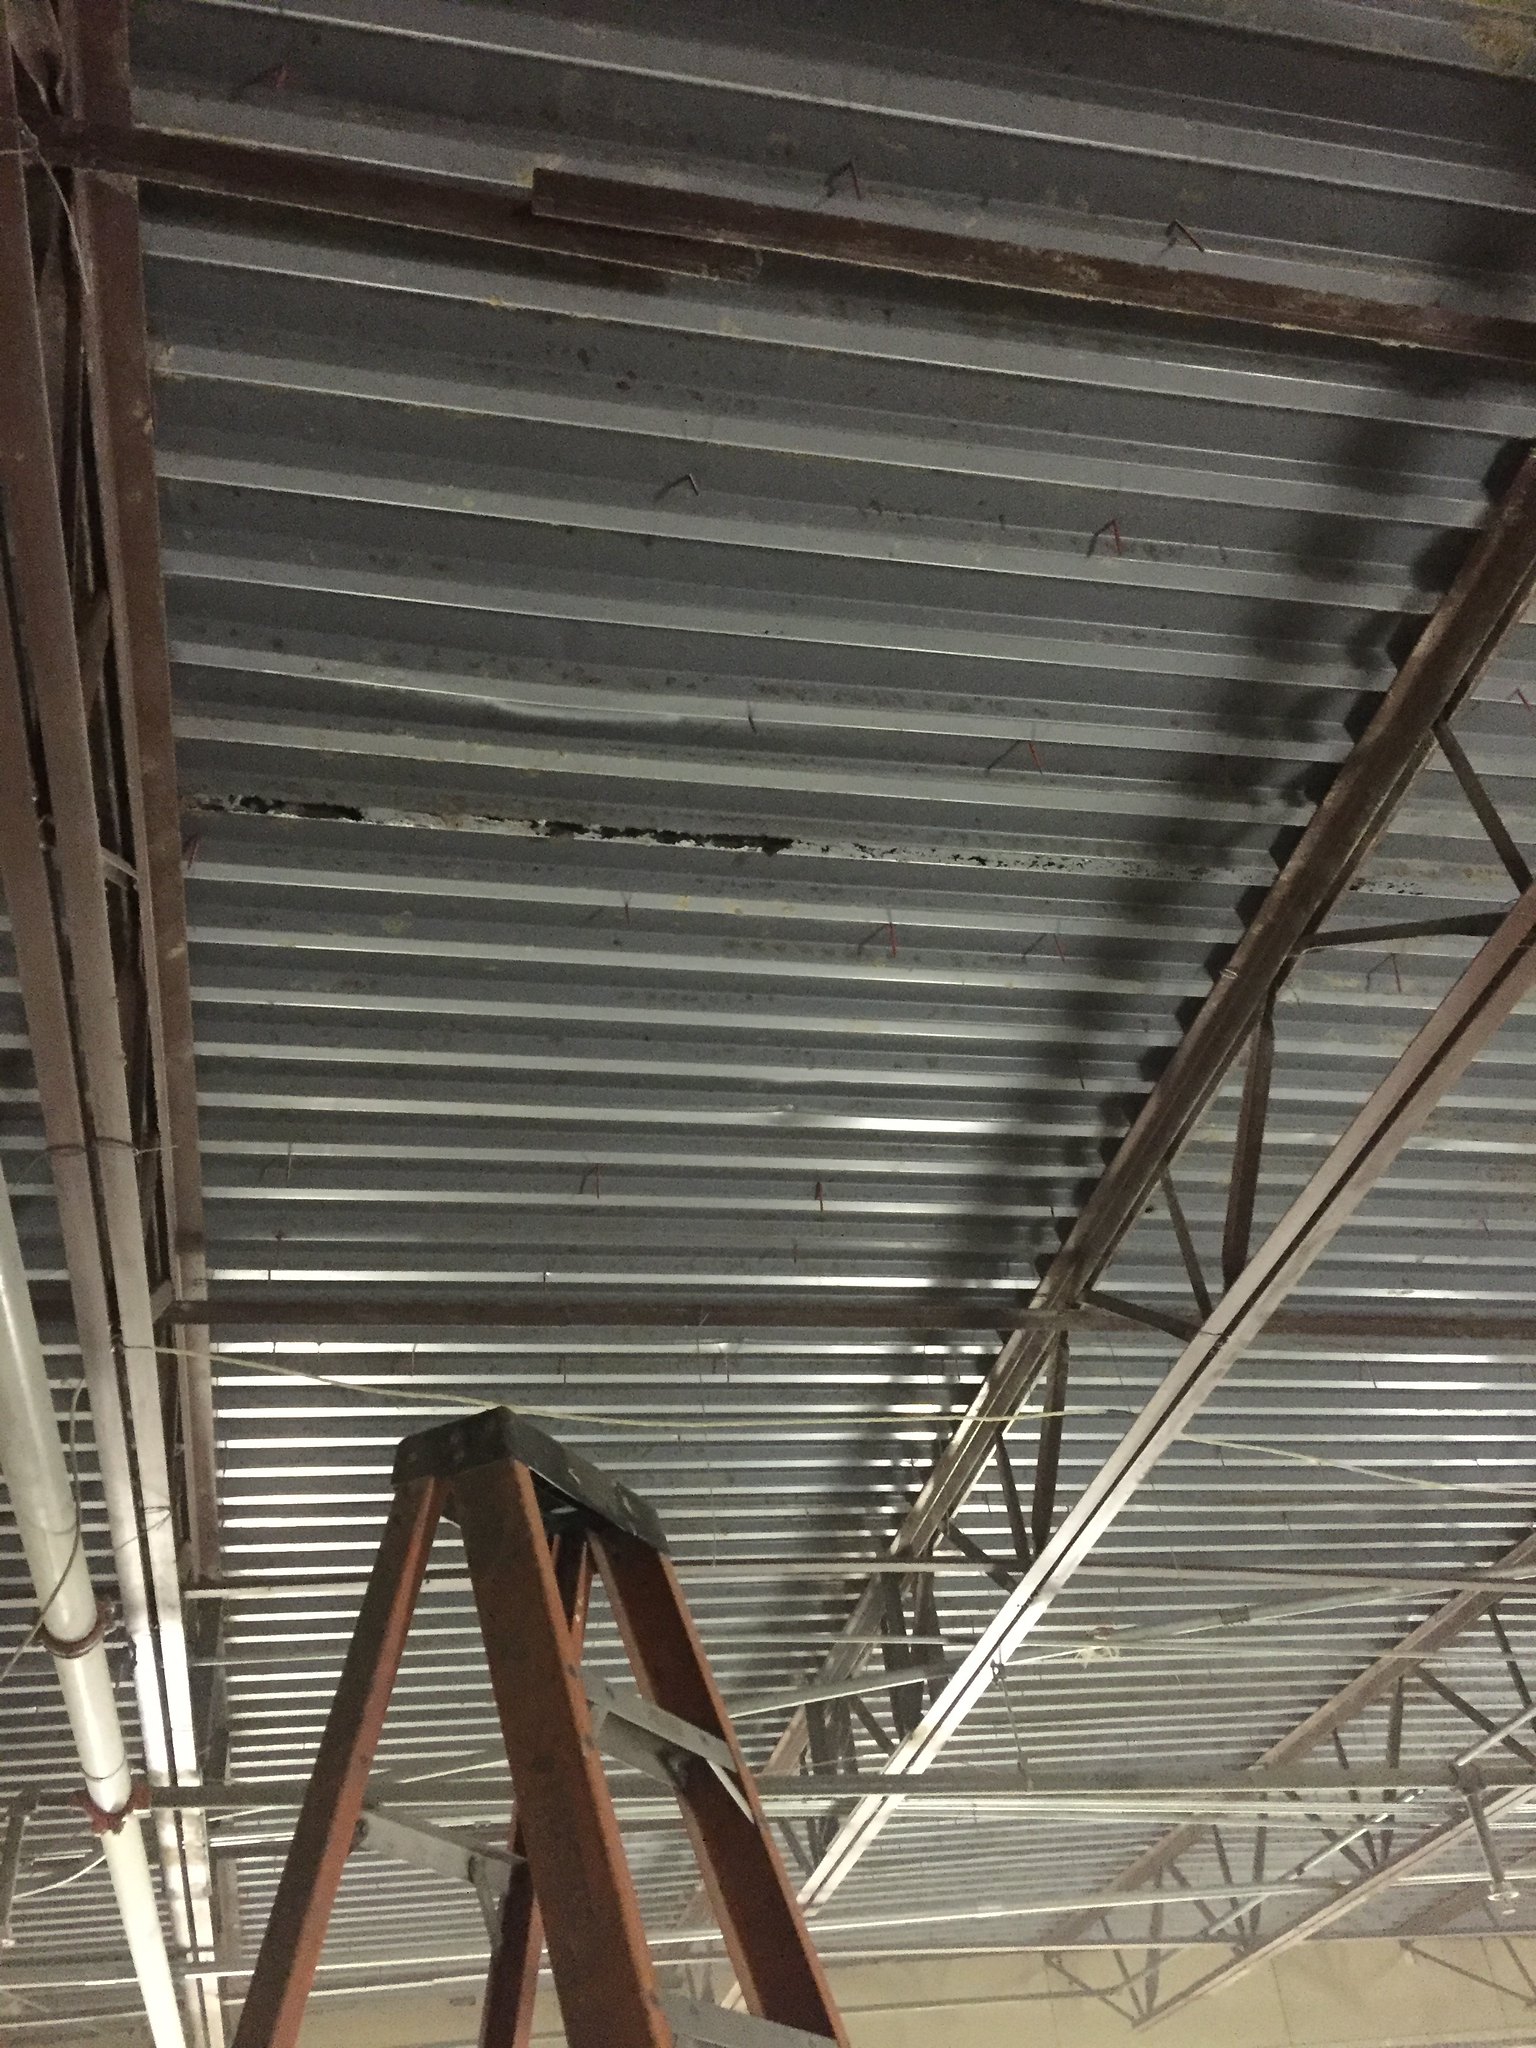 Blown-on Ceiling Insulation After Dry Ice Blasting